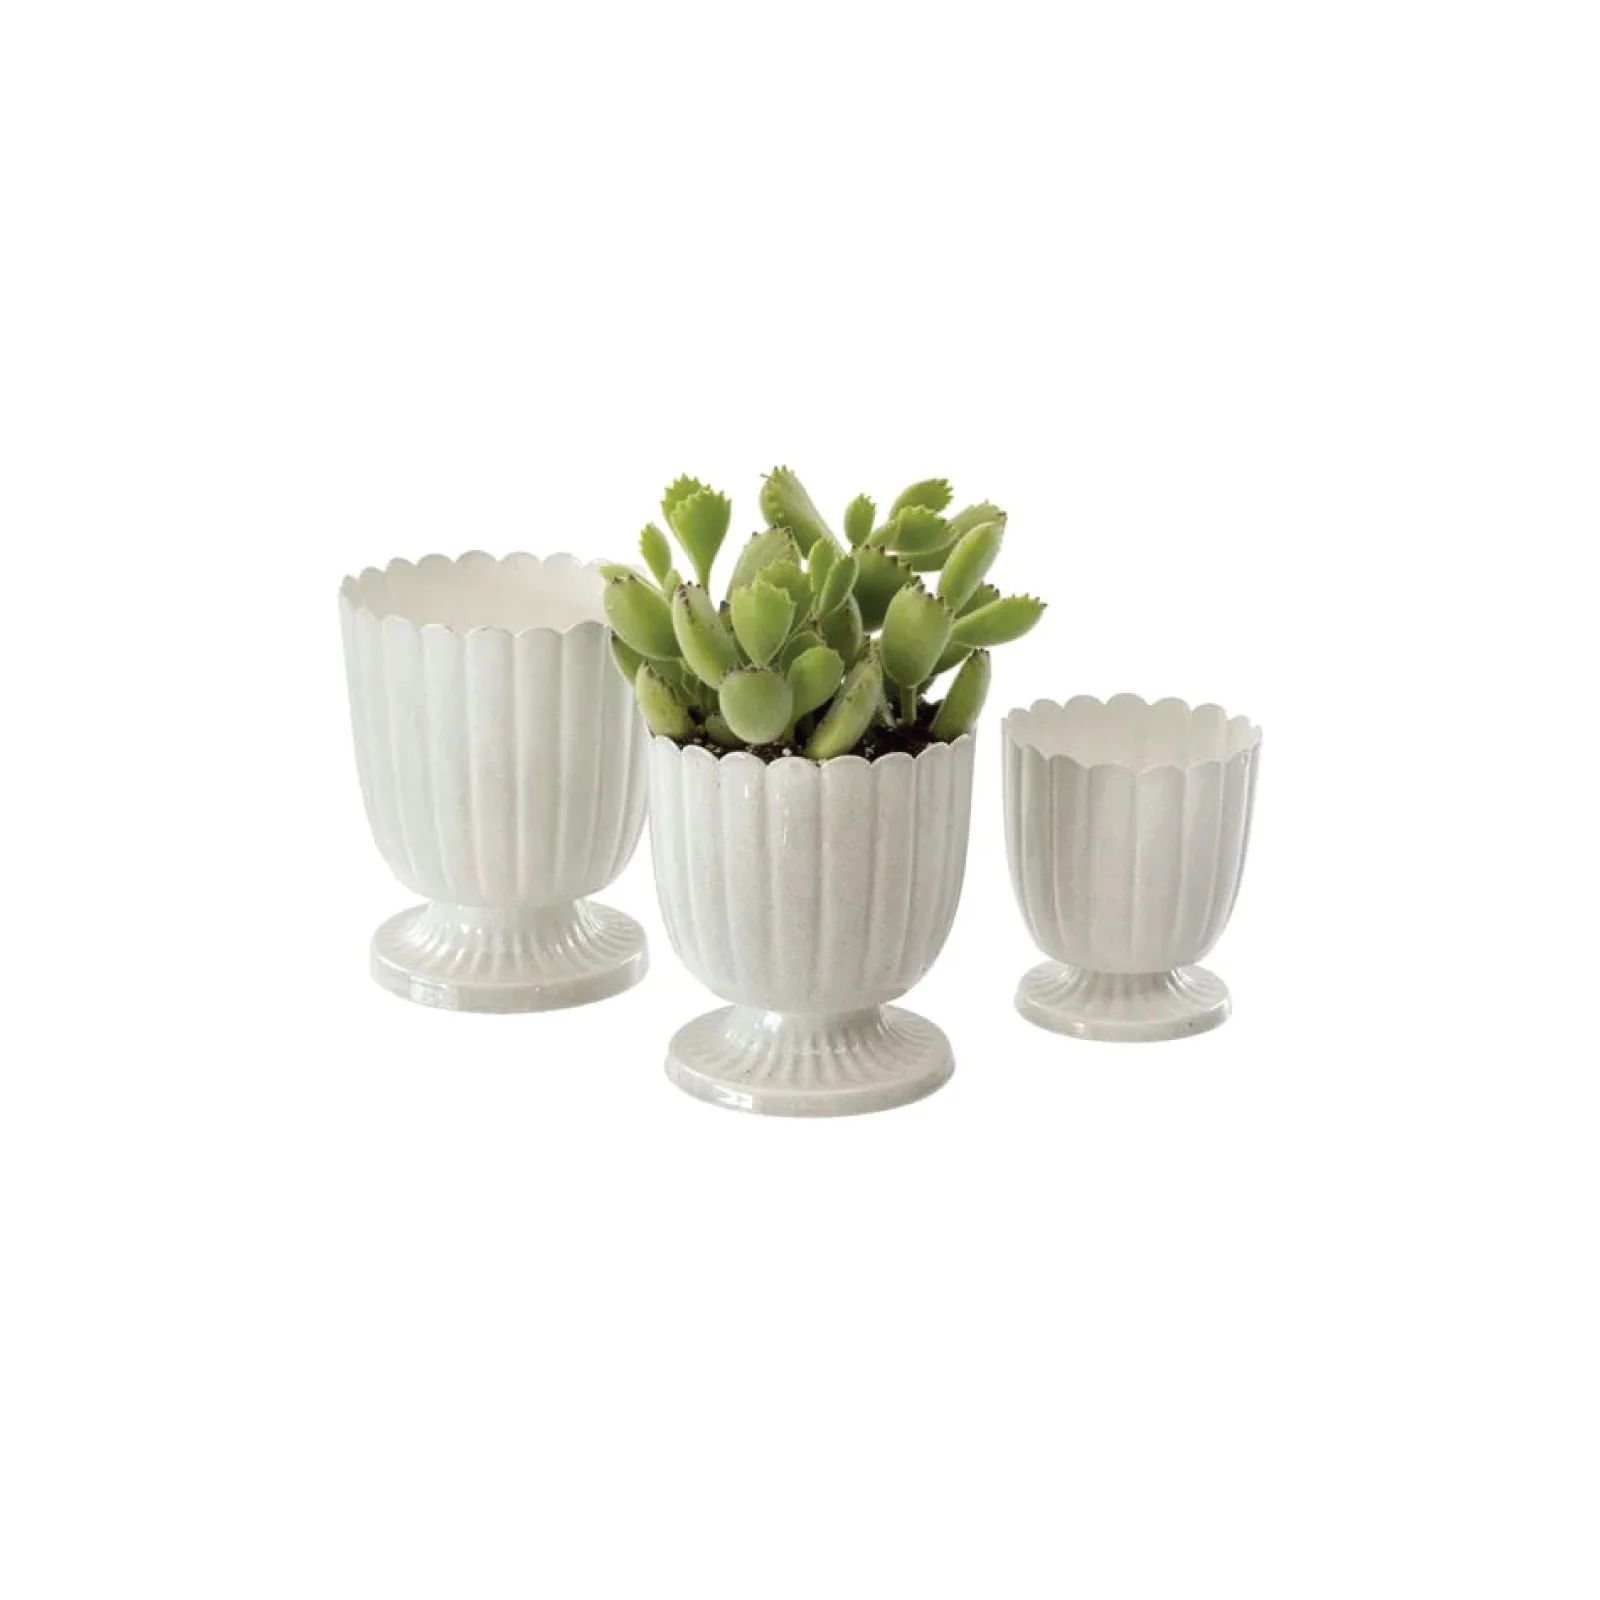 Scalloped Metal Urns, Set of 3 | Brooke and Lou